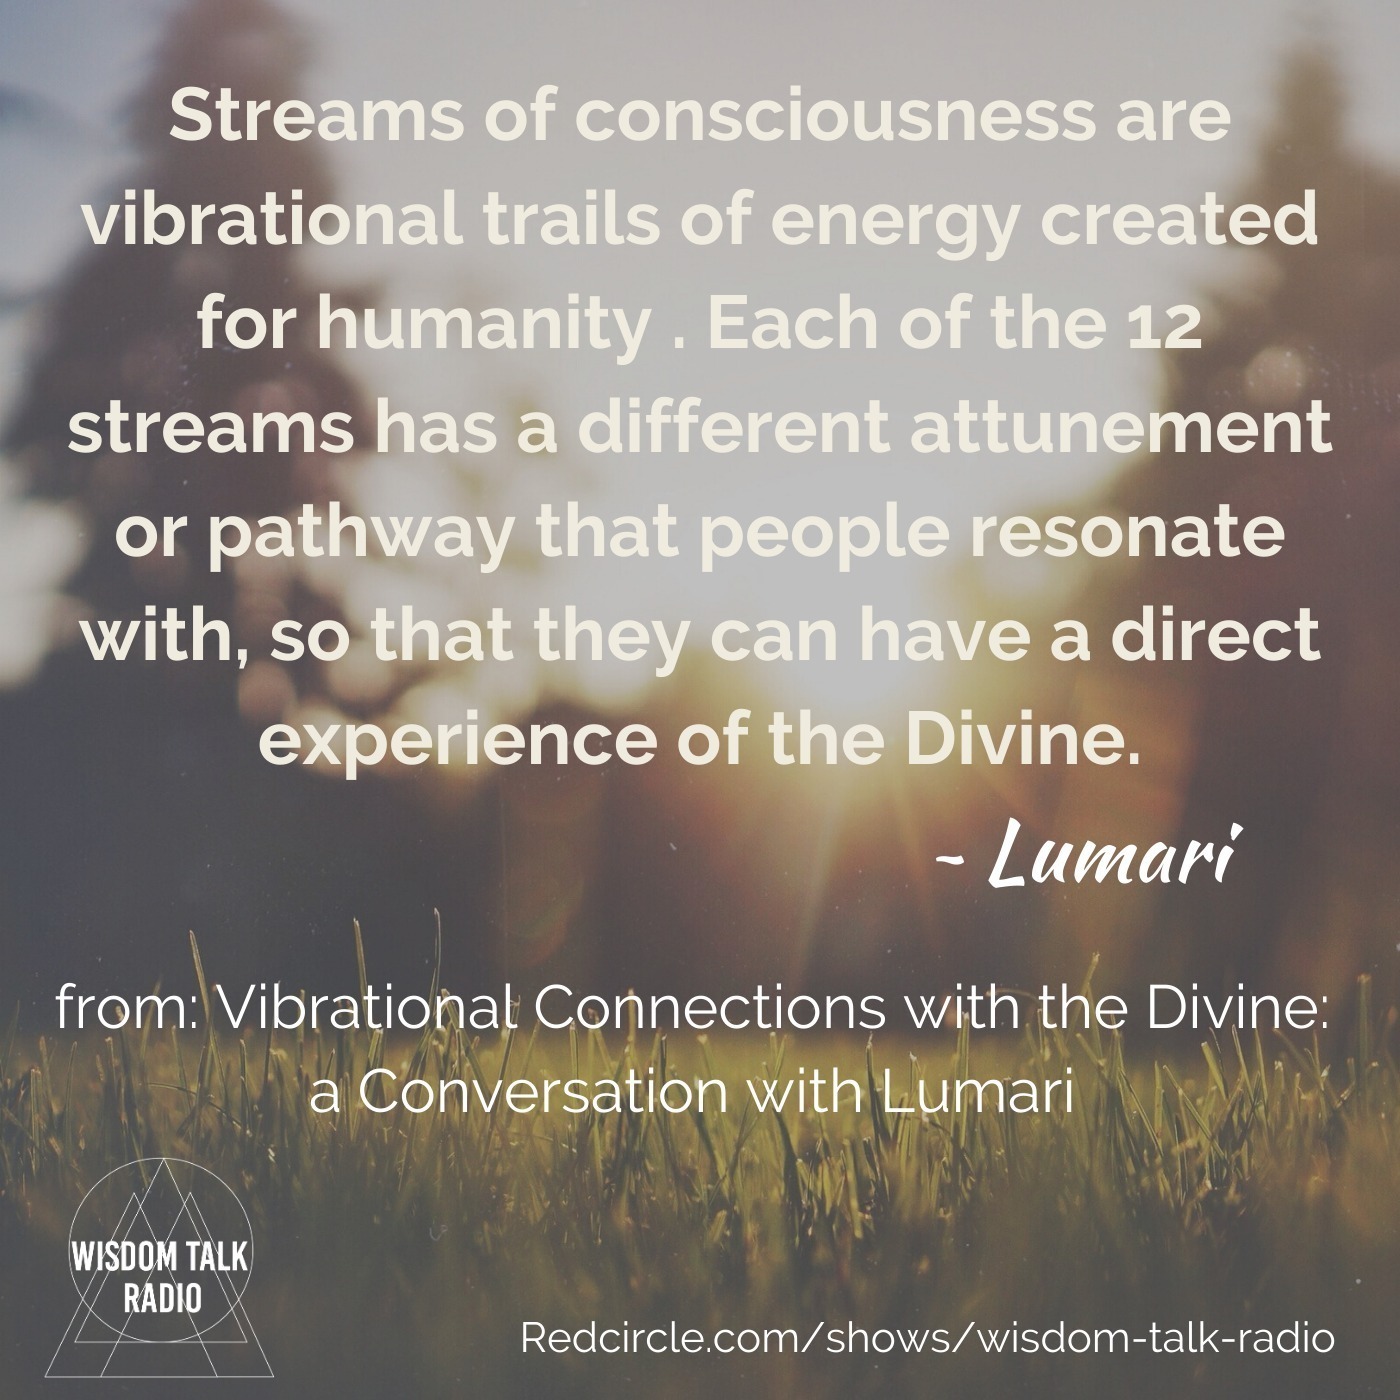 Vibrational Connections with the Divine: a conversation with Lumari